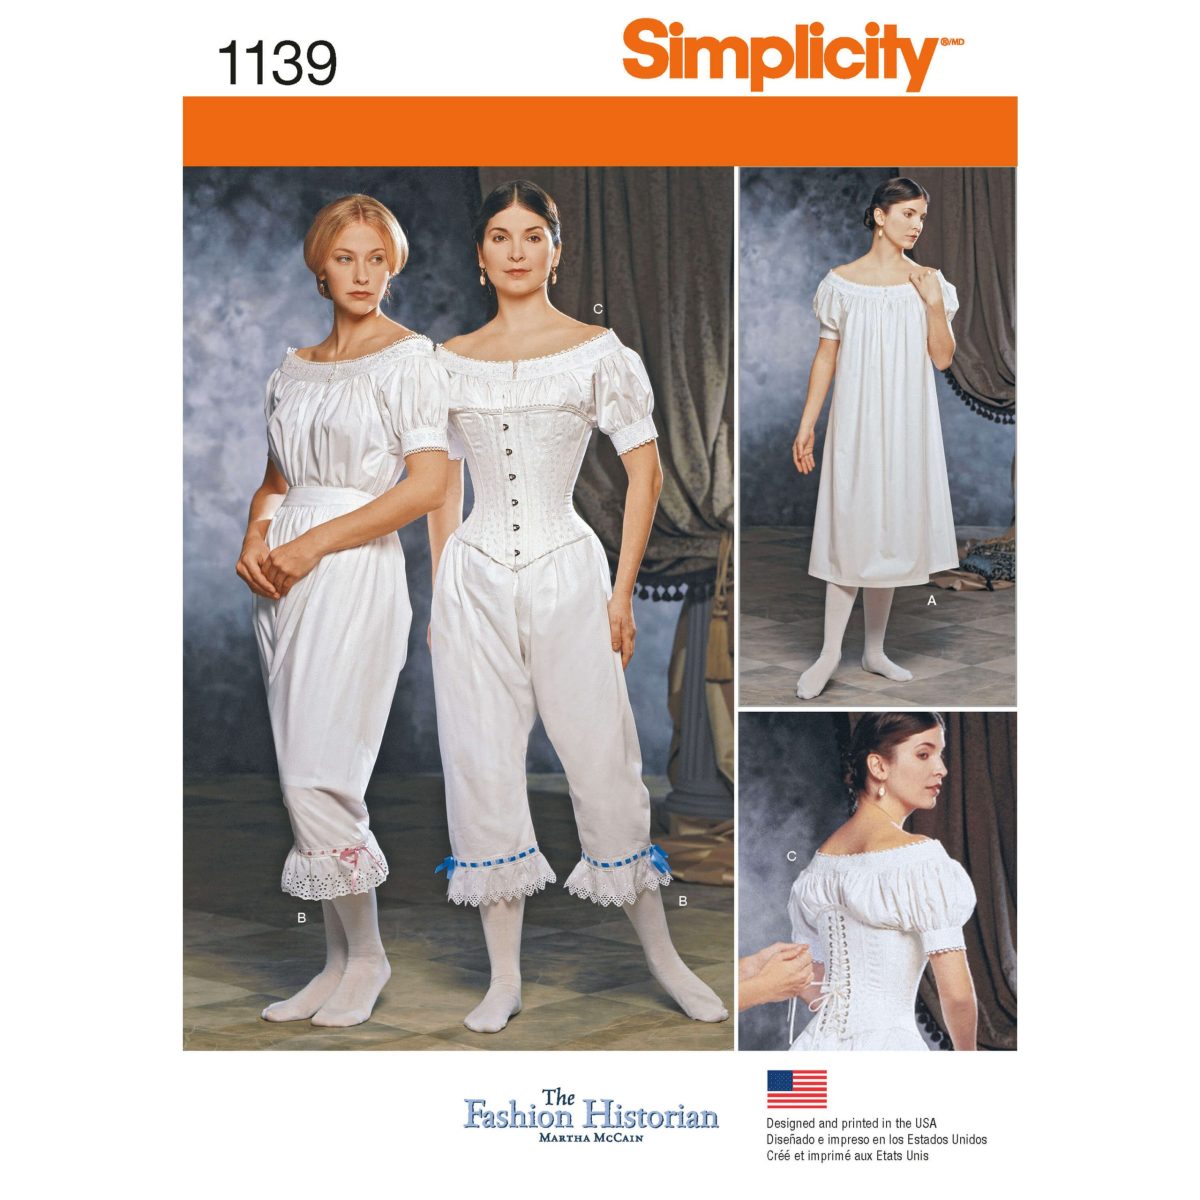 Simplicity Sewing Pattern 1139 Misses' Civil War Undergarments - Sewdirect